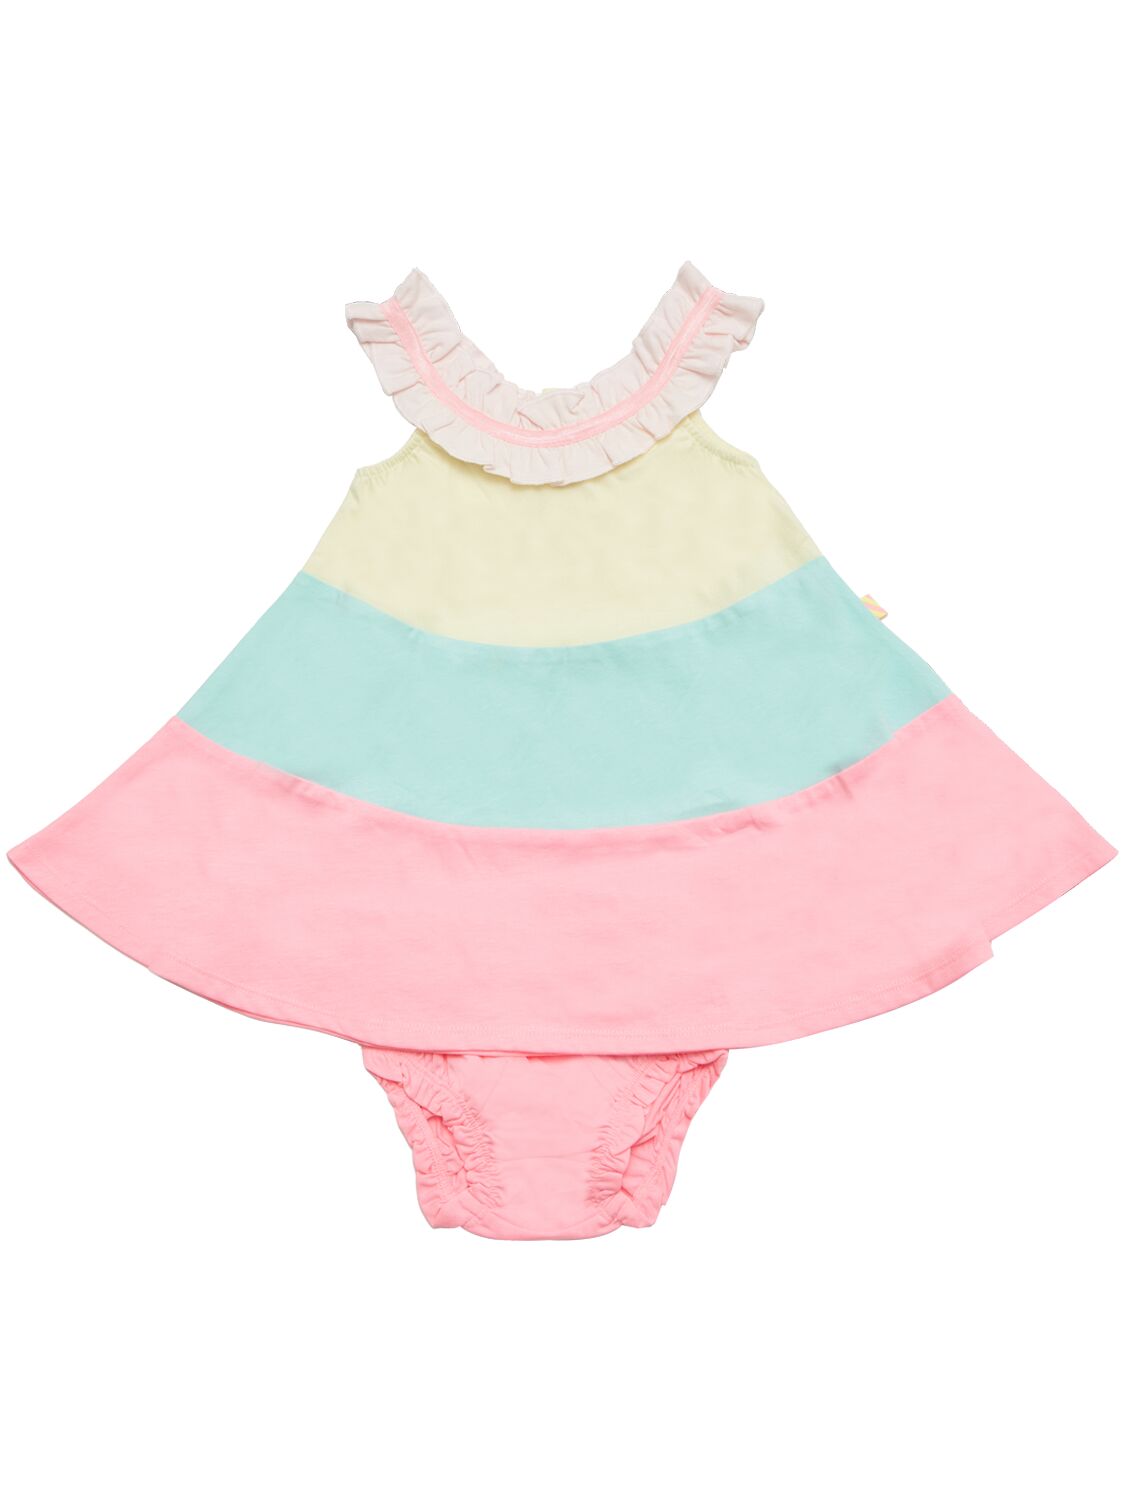 Image of Cotton Jersey Dress & Diaper Cover